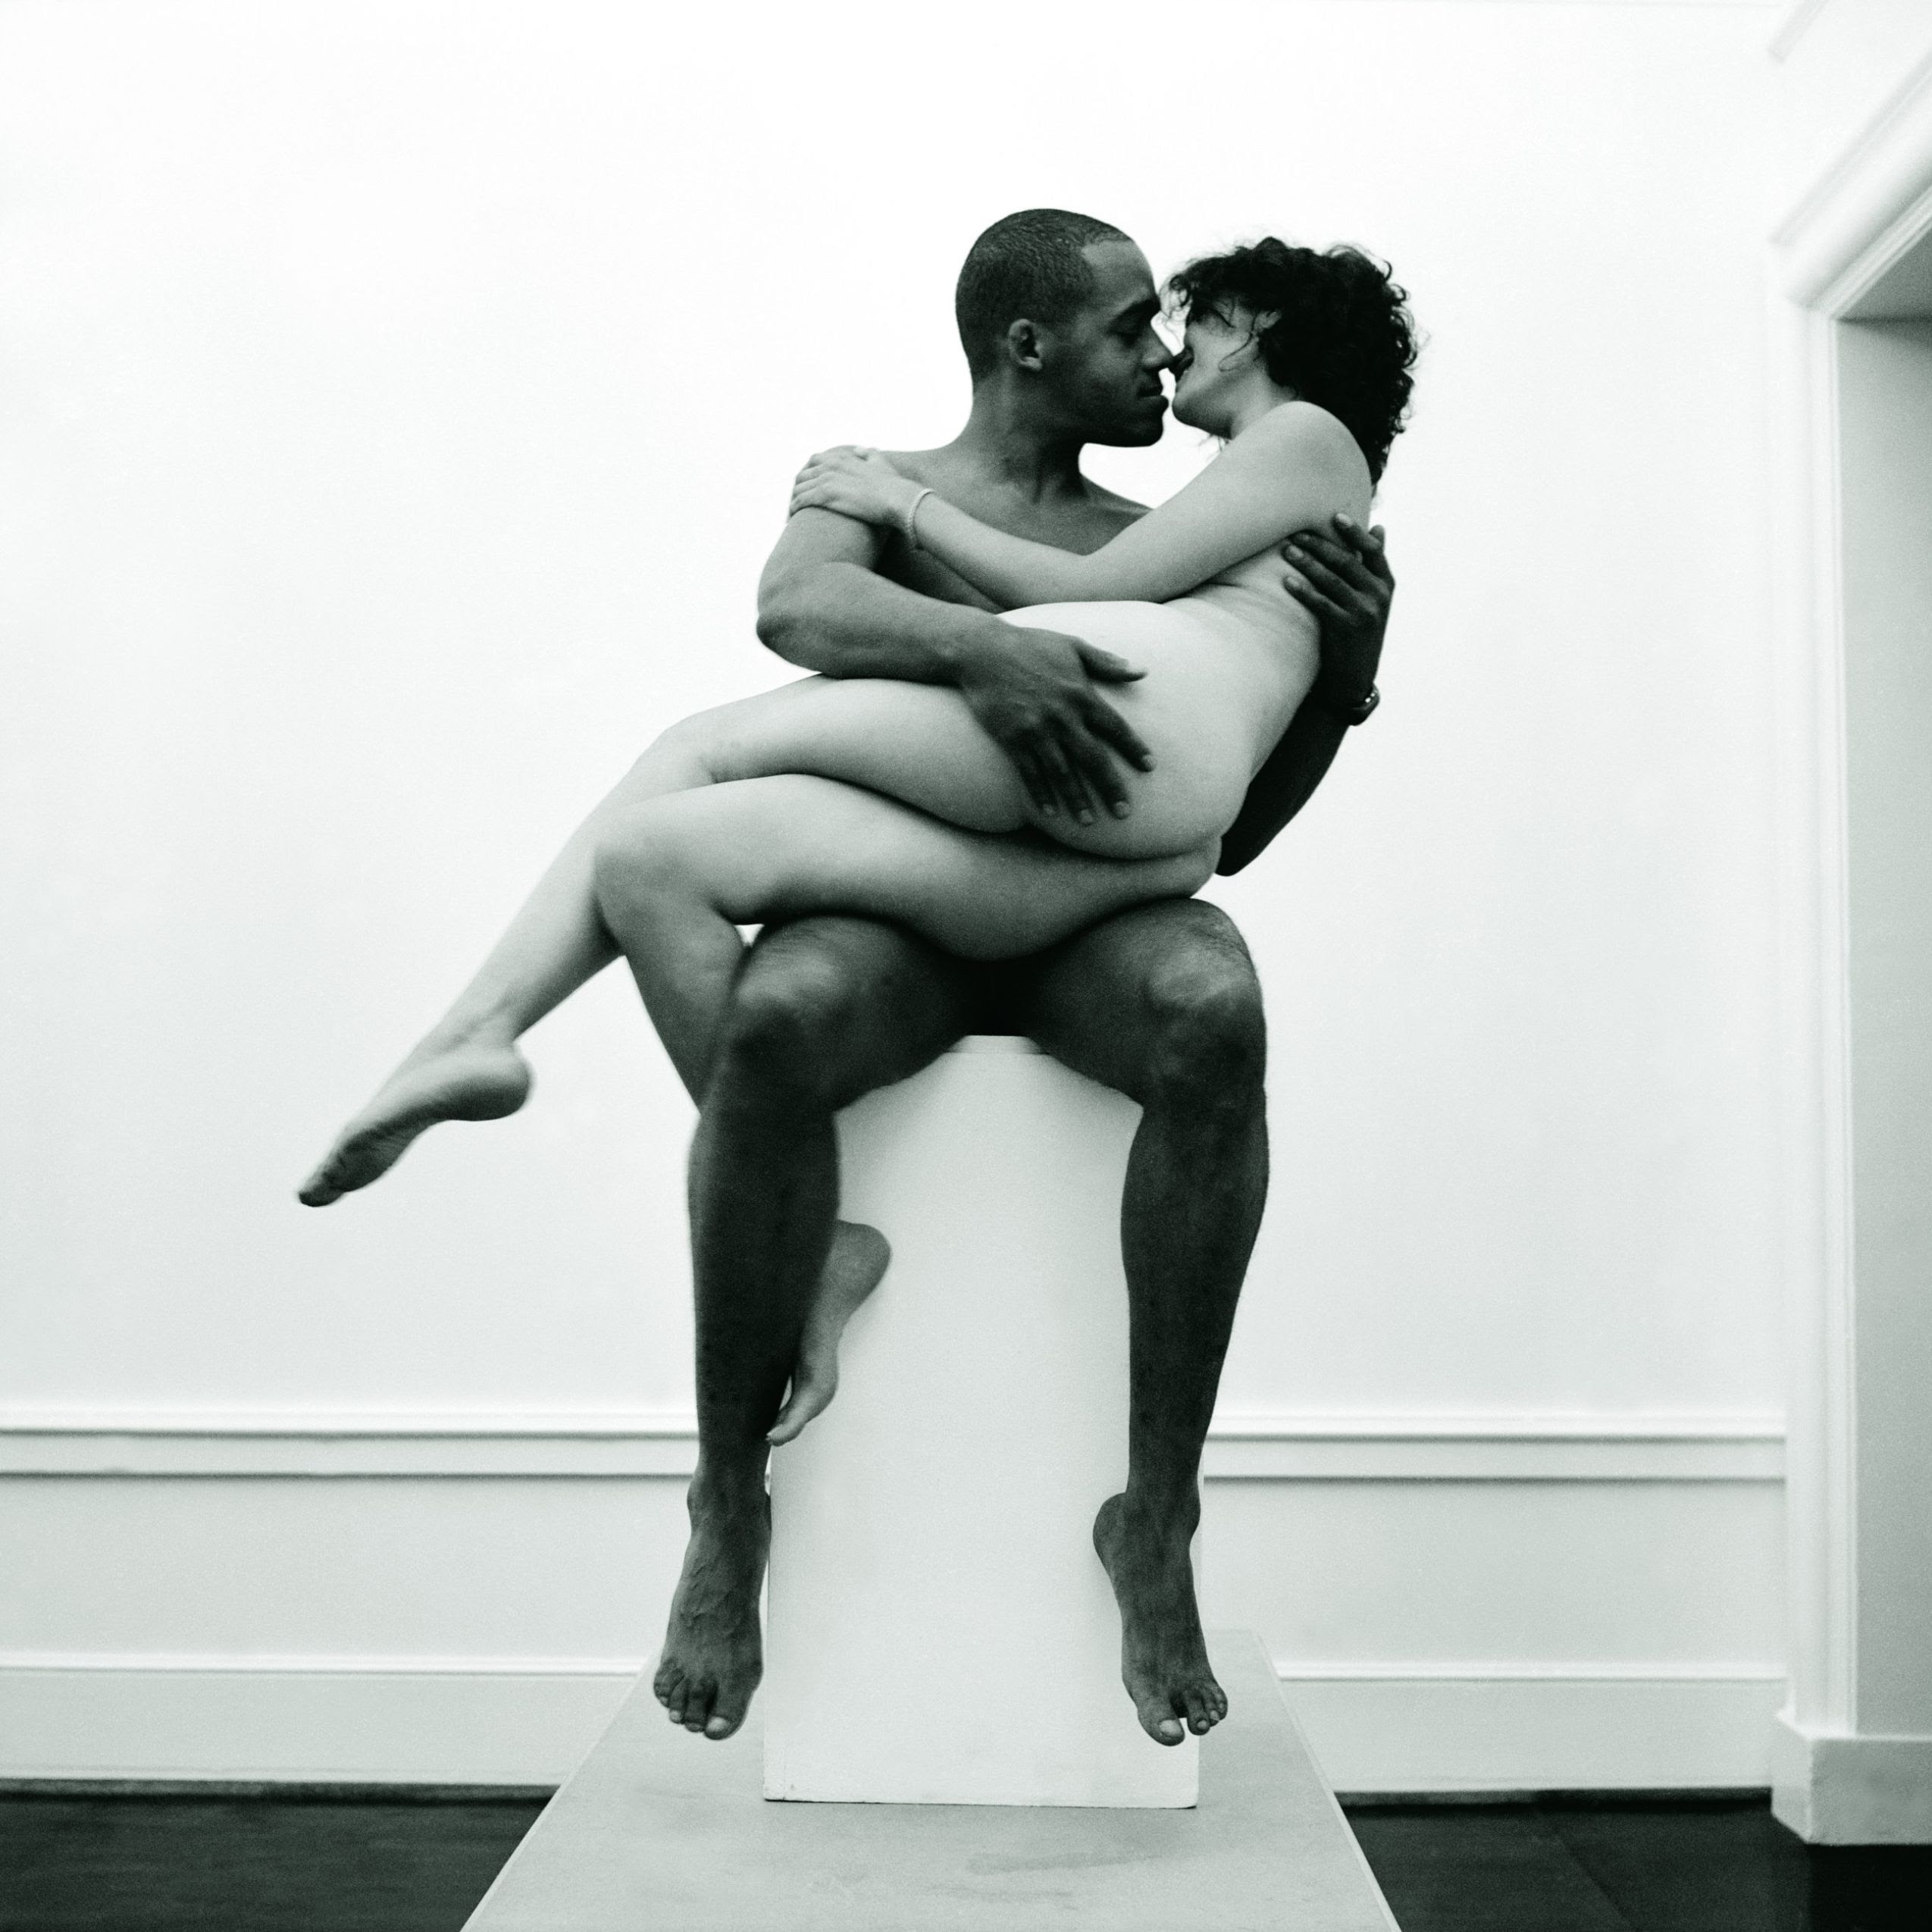 A photographic work by Tracey Rose. The black and white image features a brown-skinned man and a light-skinned woman embracing, naked, while sitting on a white pedestal. Posing against a white wall, smiling, their noses are touching. They seem to be on the verge of kissing. 